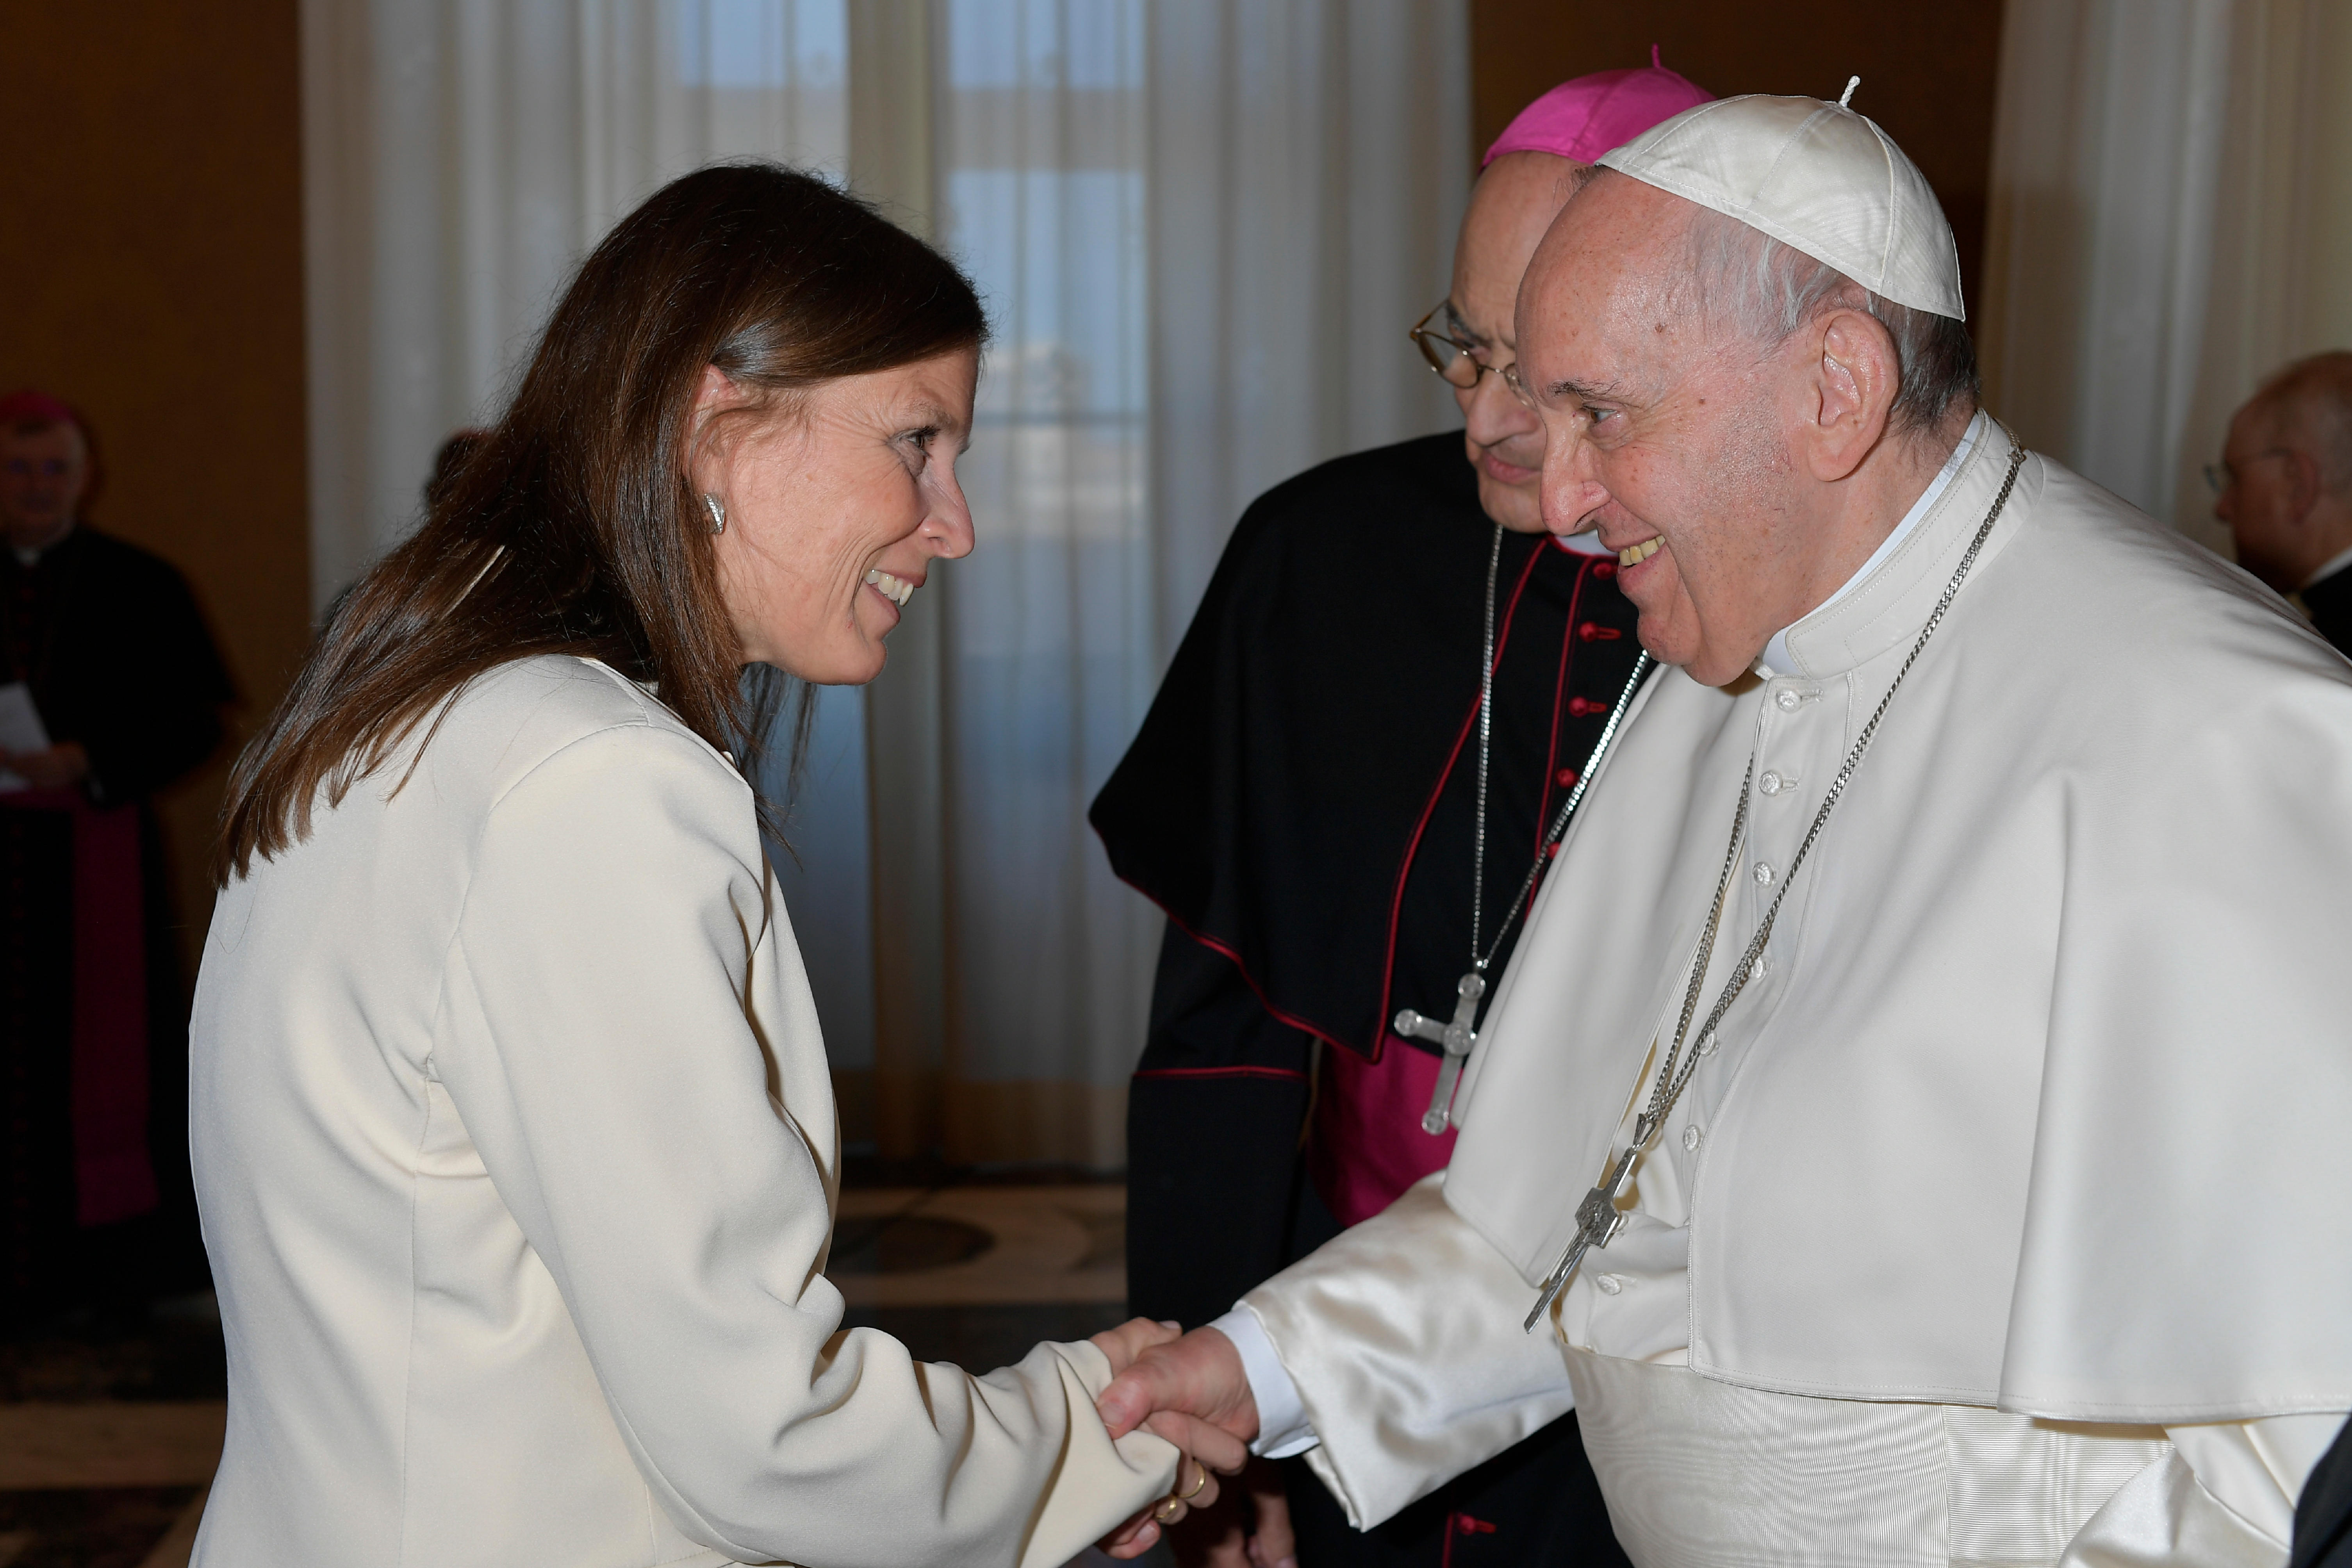 Dr. Mariana Falconier shaking hands with the Pope